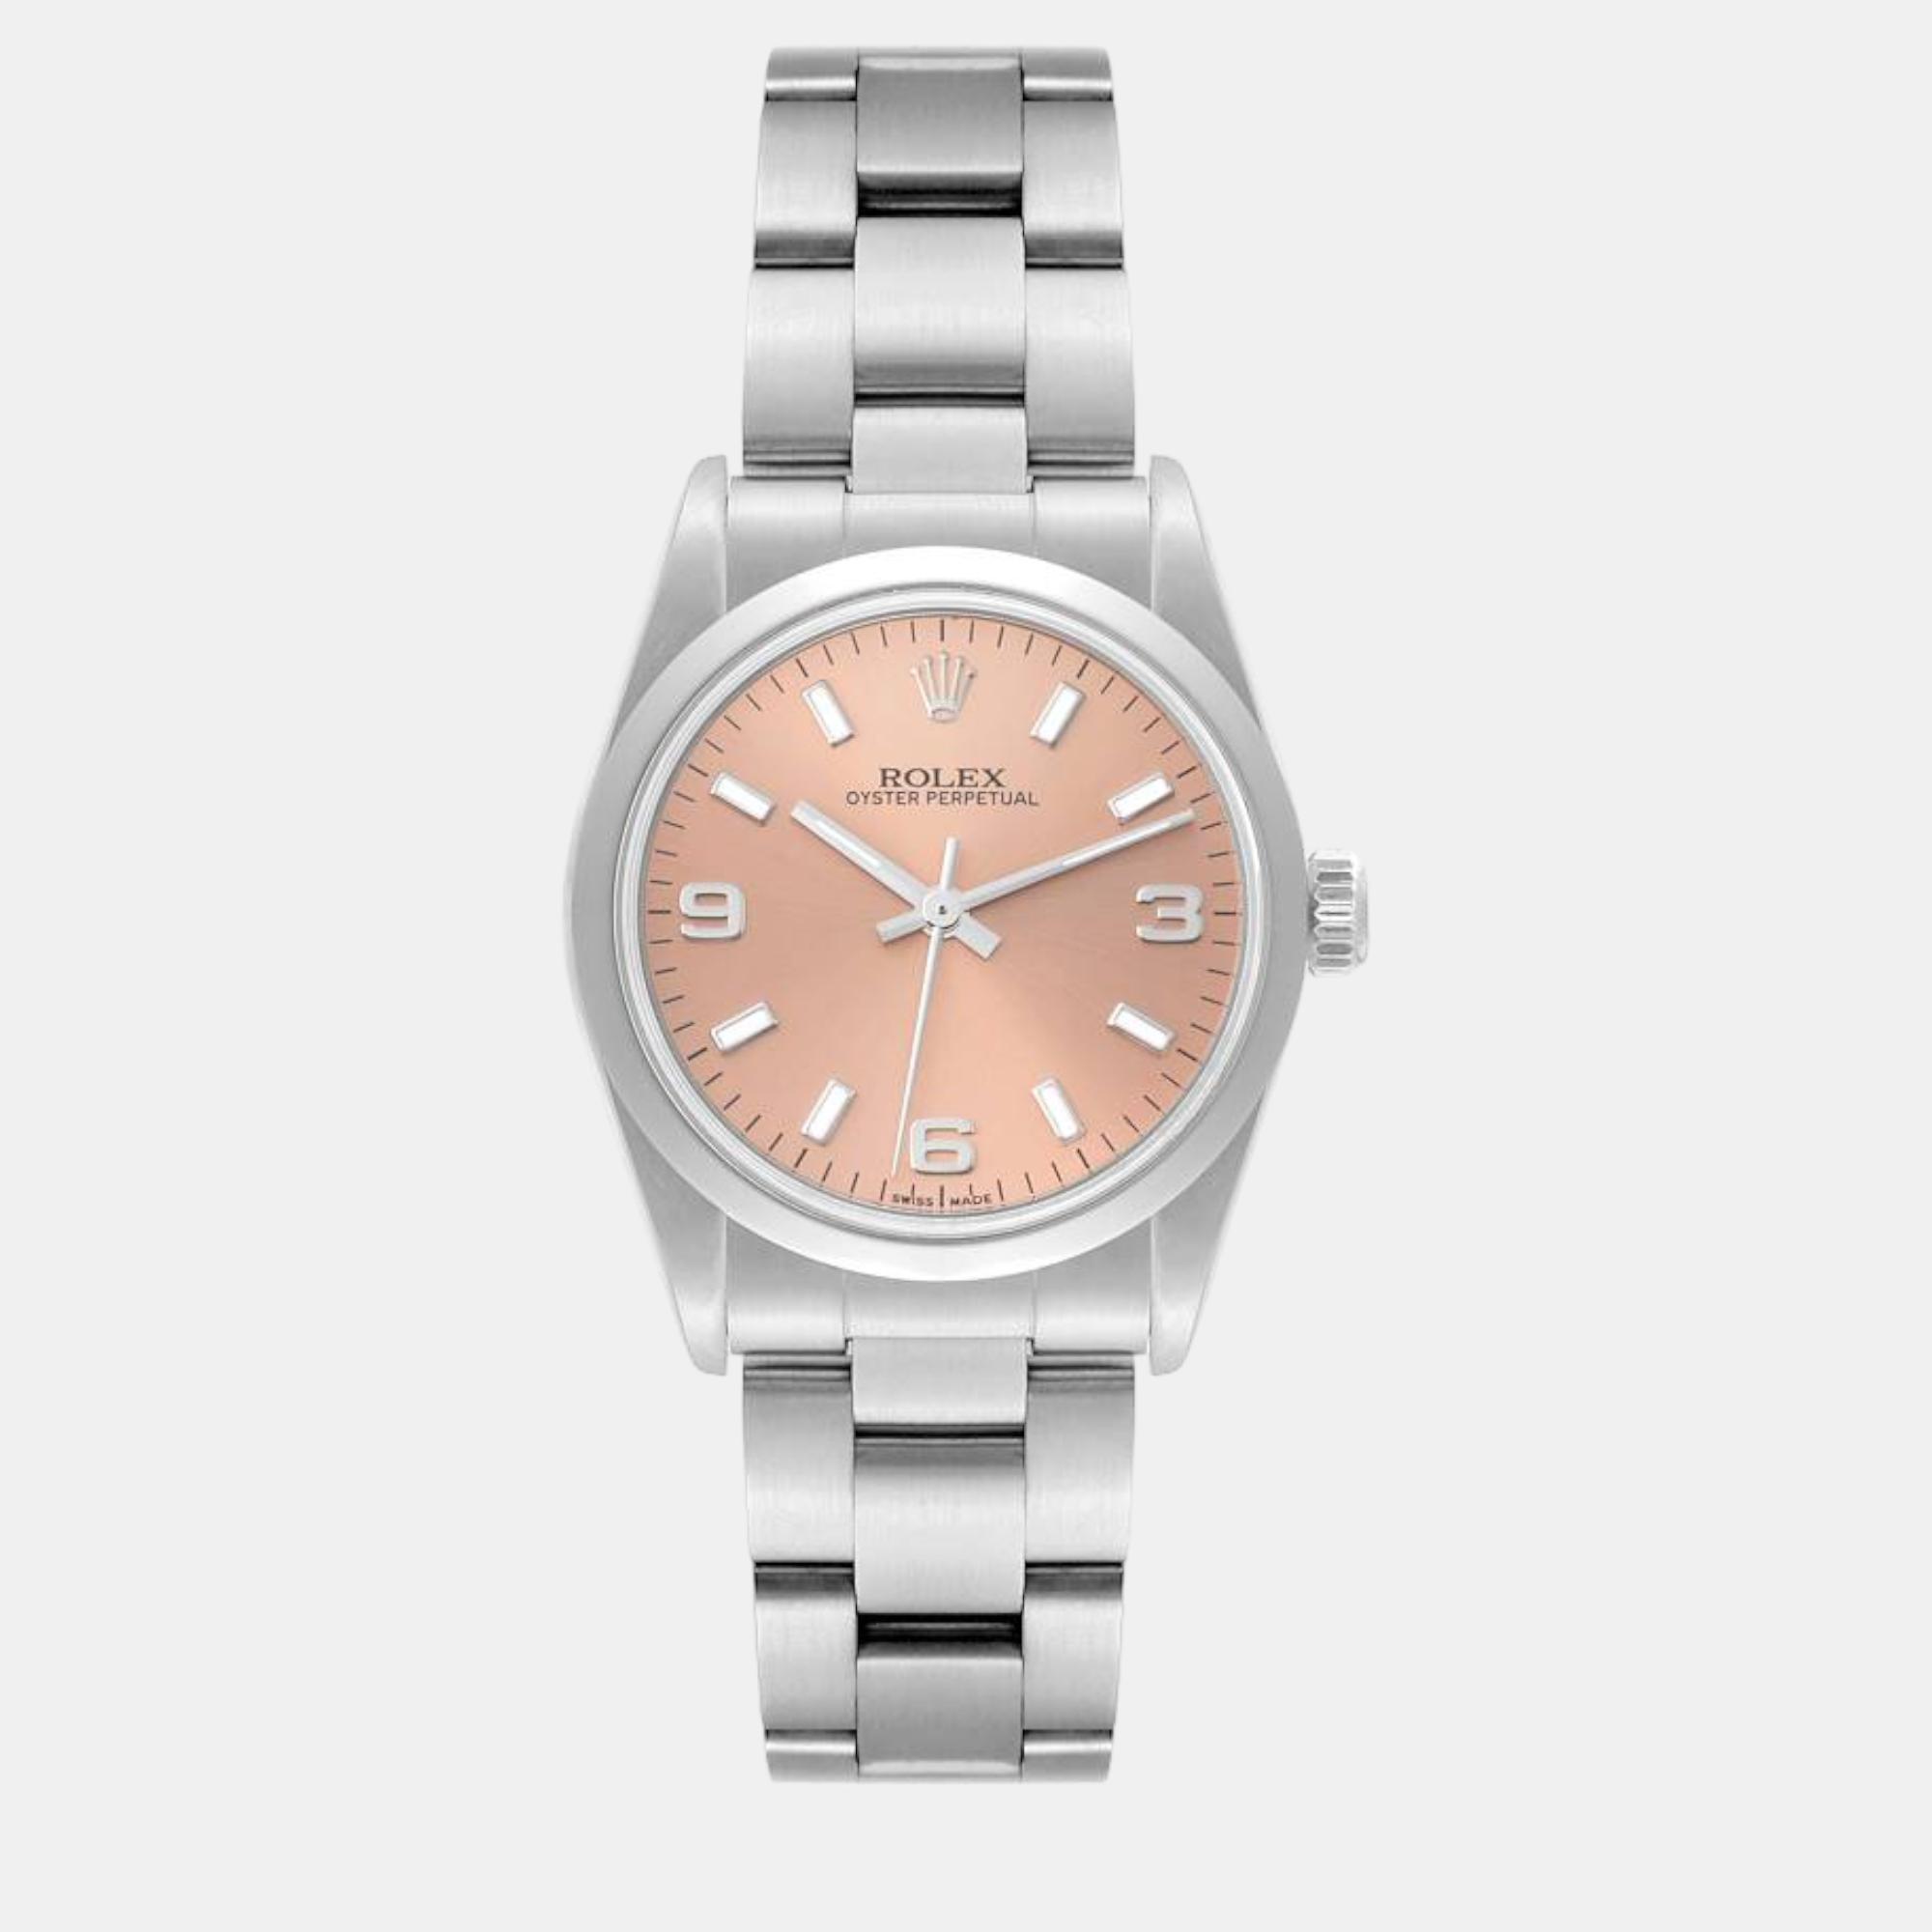 Rolex oyster perpetual midsize salmon dial steel ladies watch 31 mm